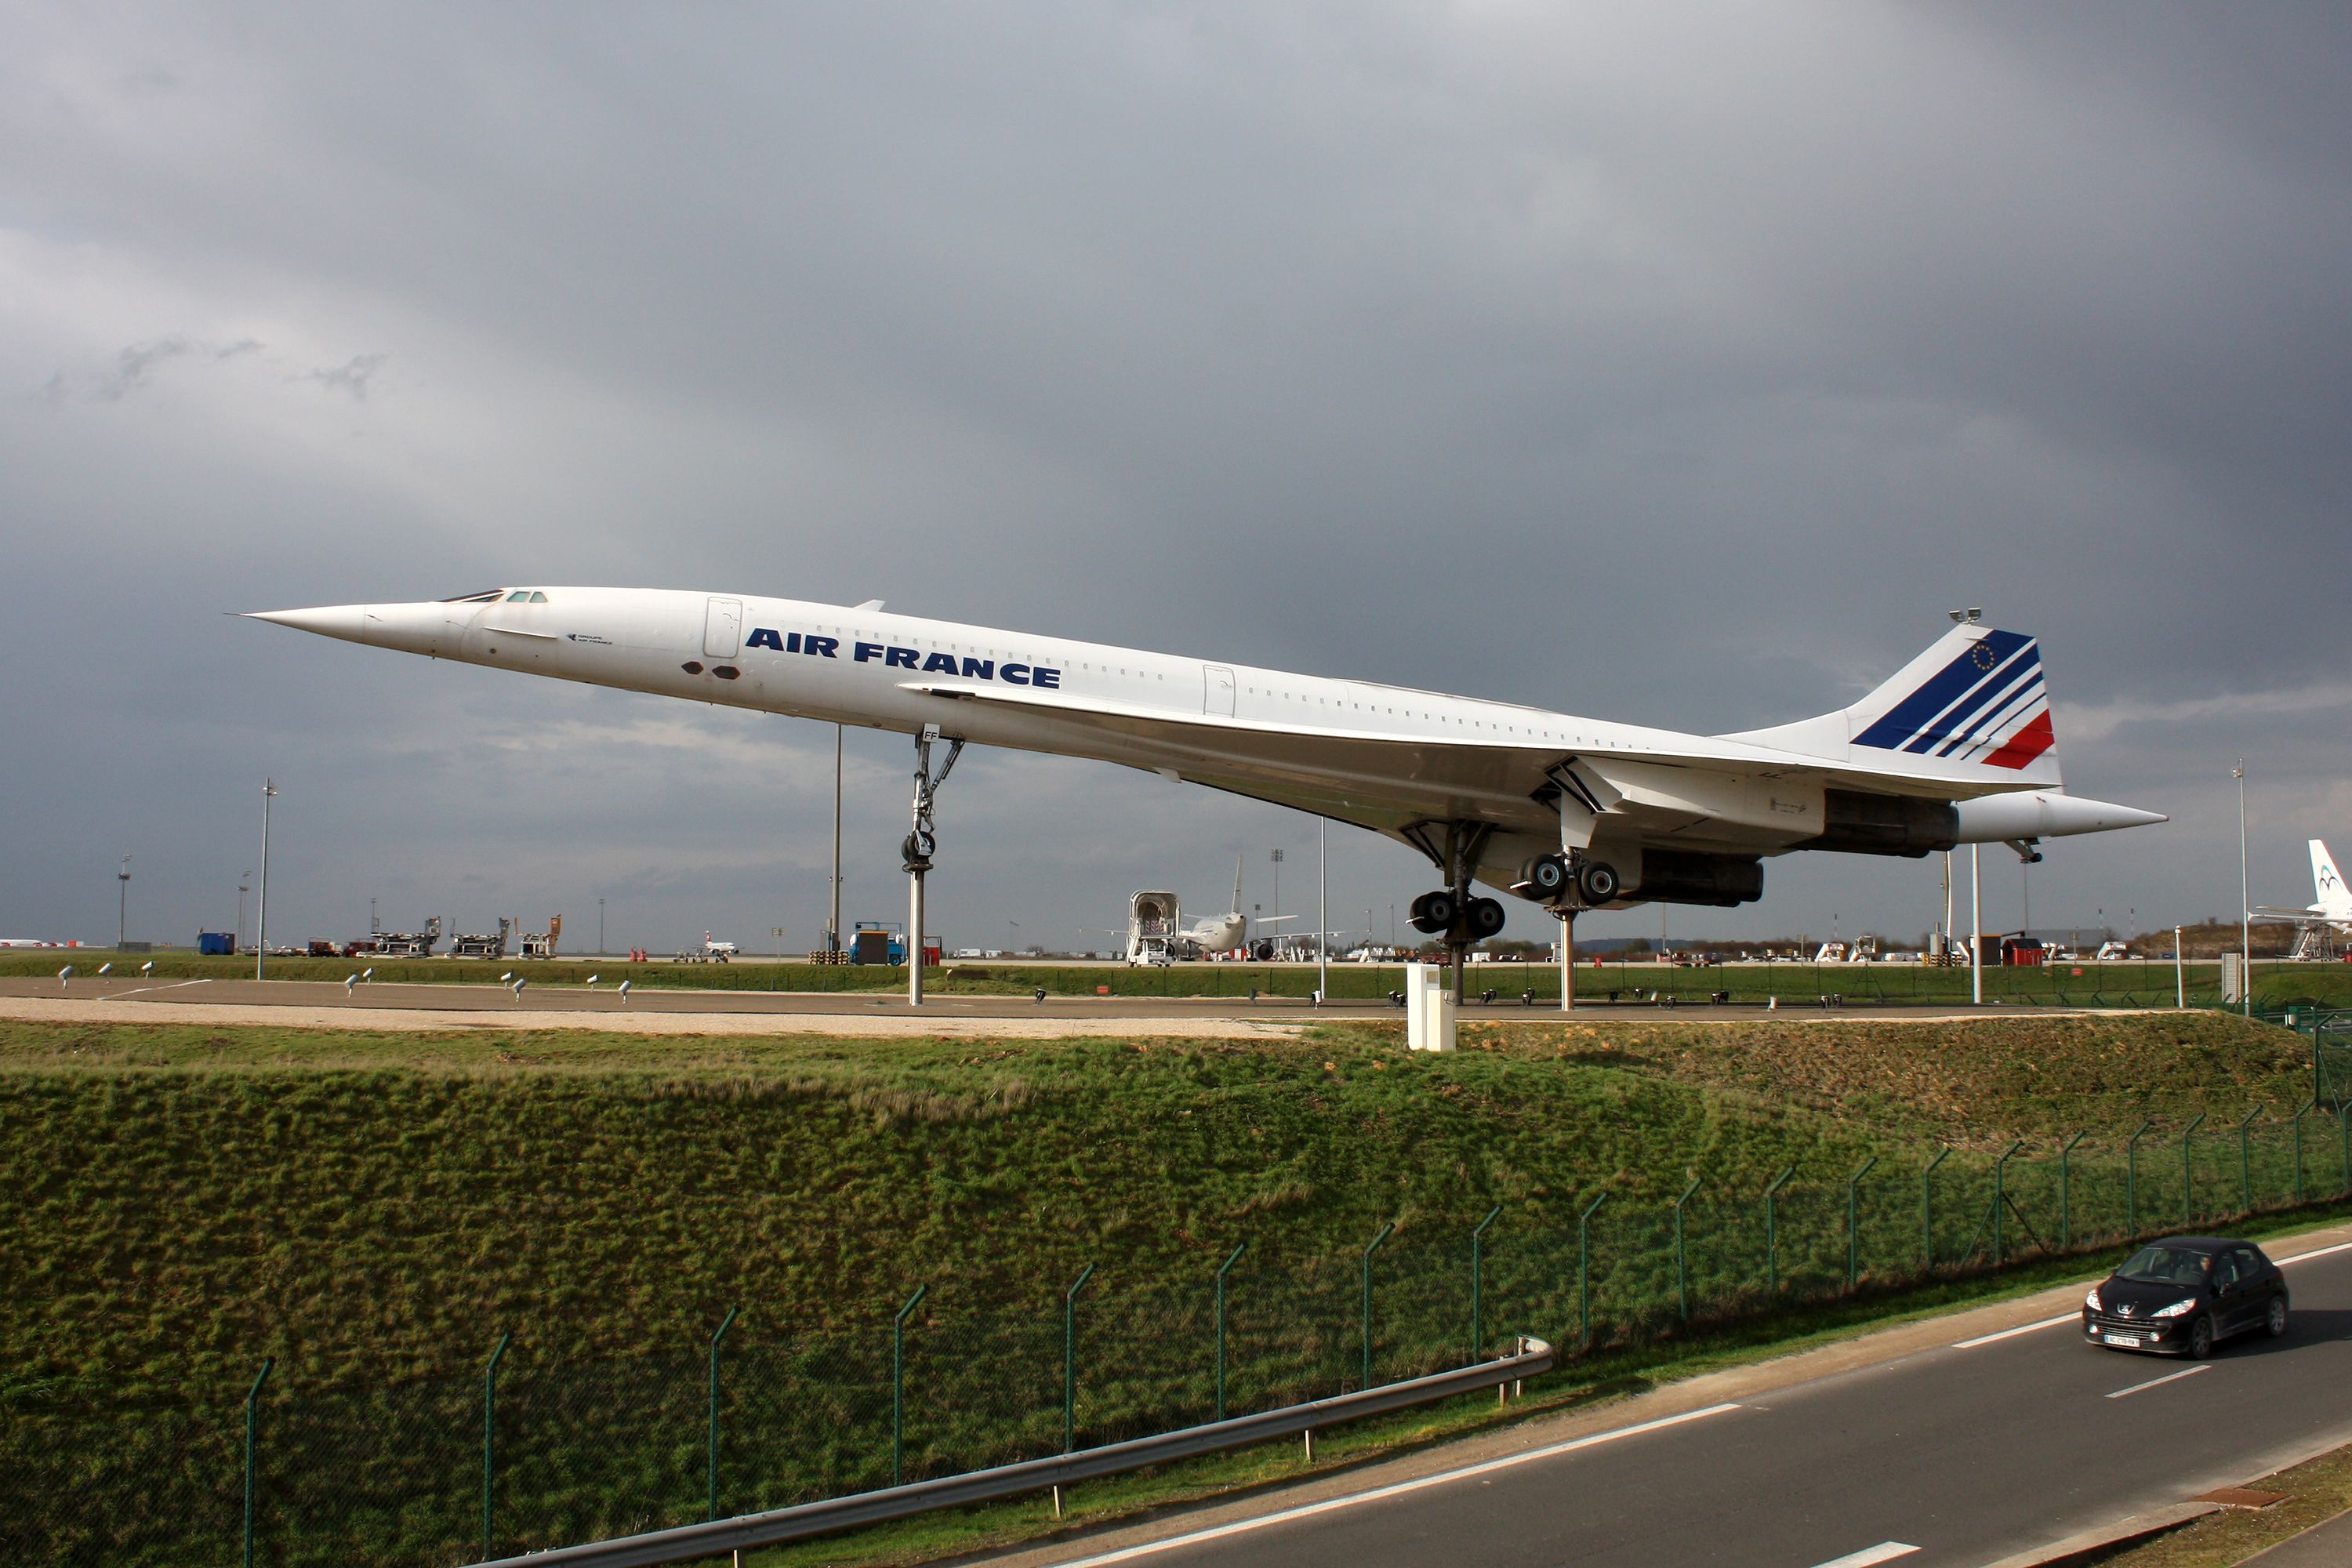 An Air France Concorde on display.